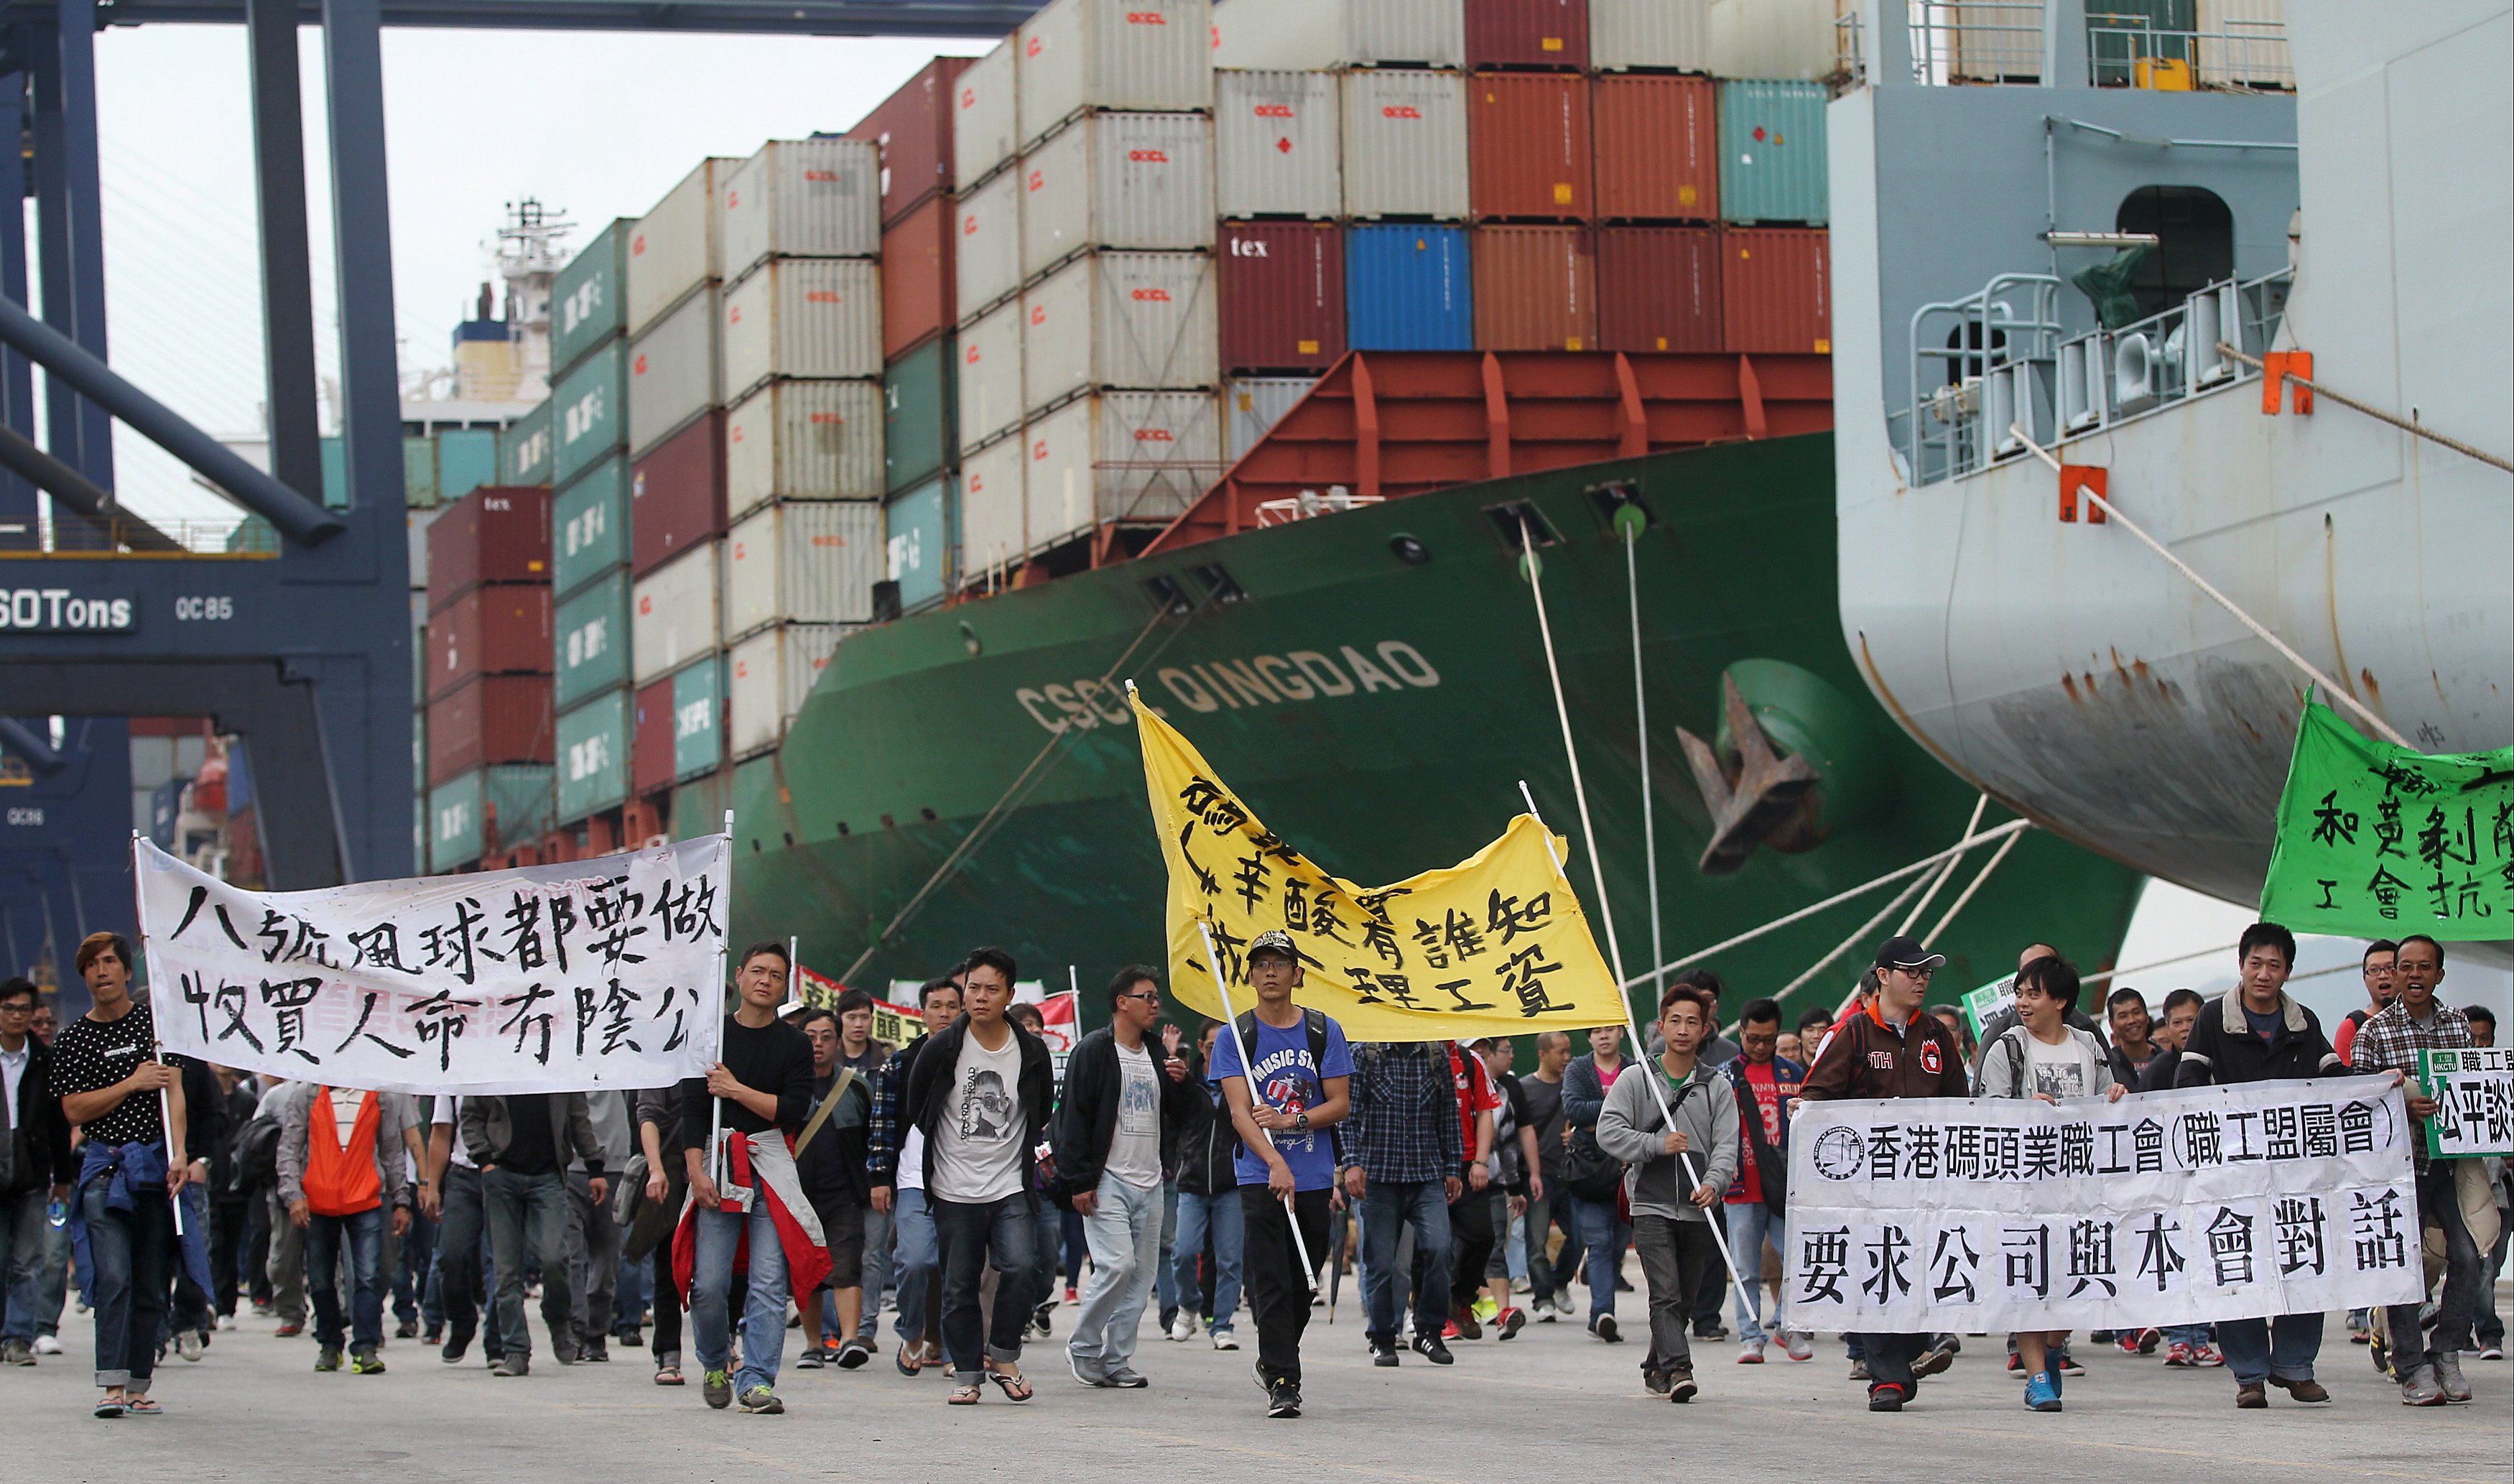 Dock workers went on strike for 40 days in 2013. Photo: SCMP